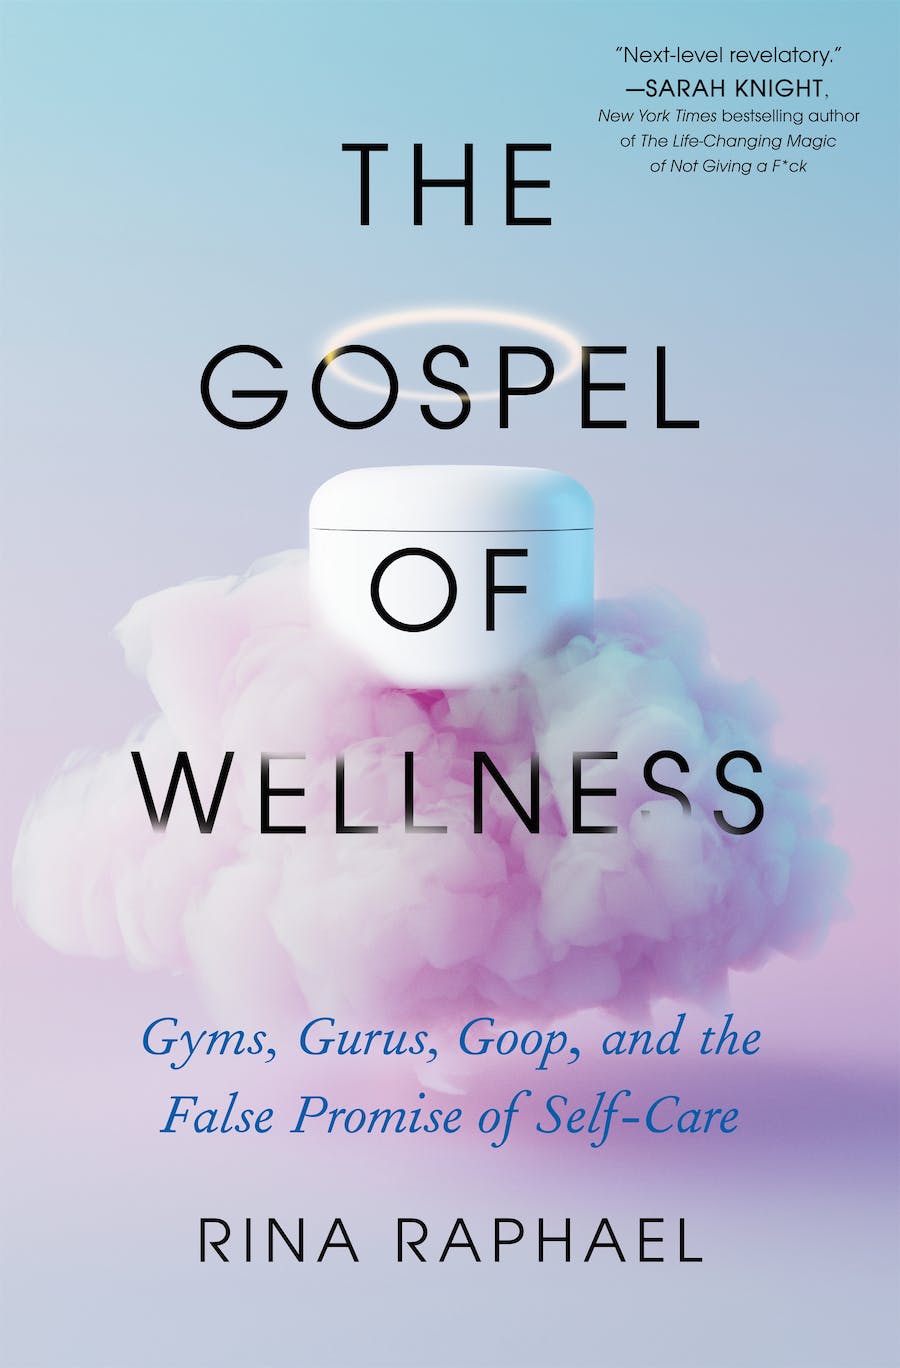 The Gospel of Wellness: Gyms, Gurus, Goop, and the False Promise of Self-Care by Rina Raphael